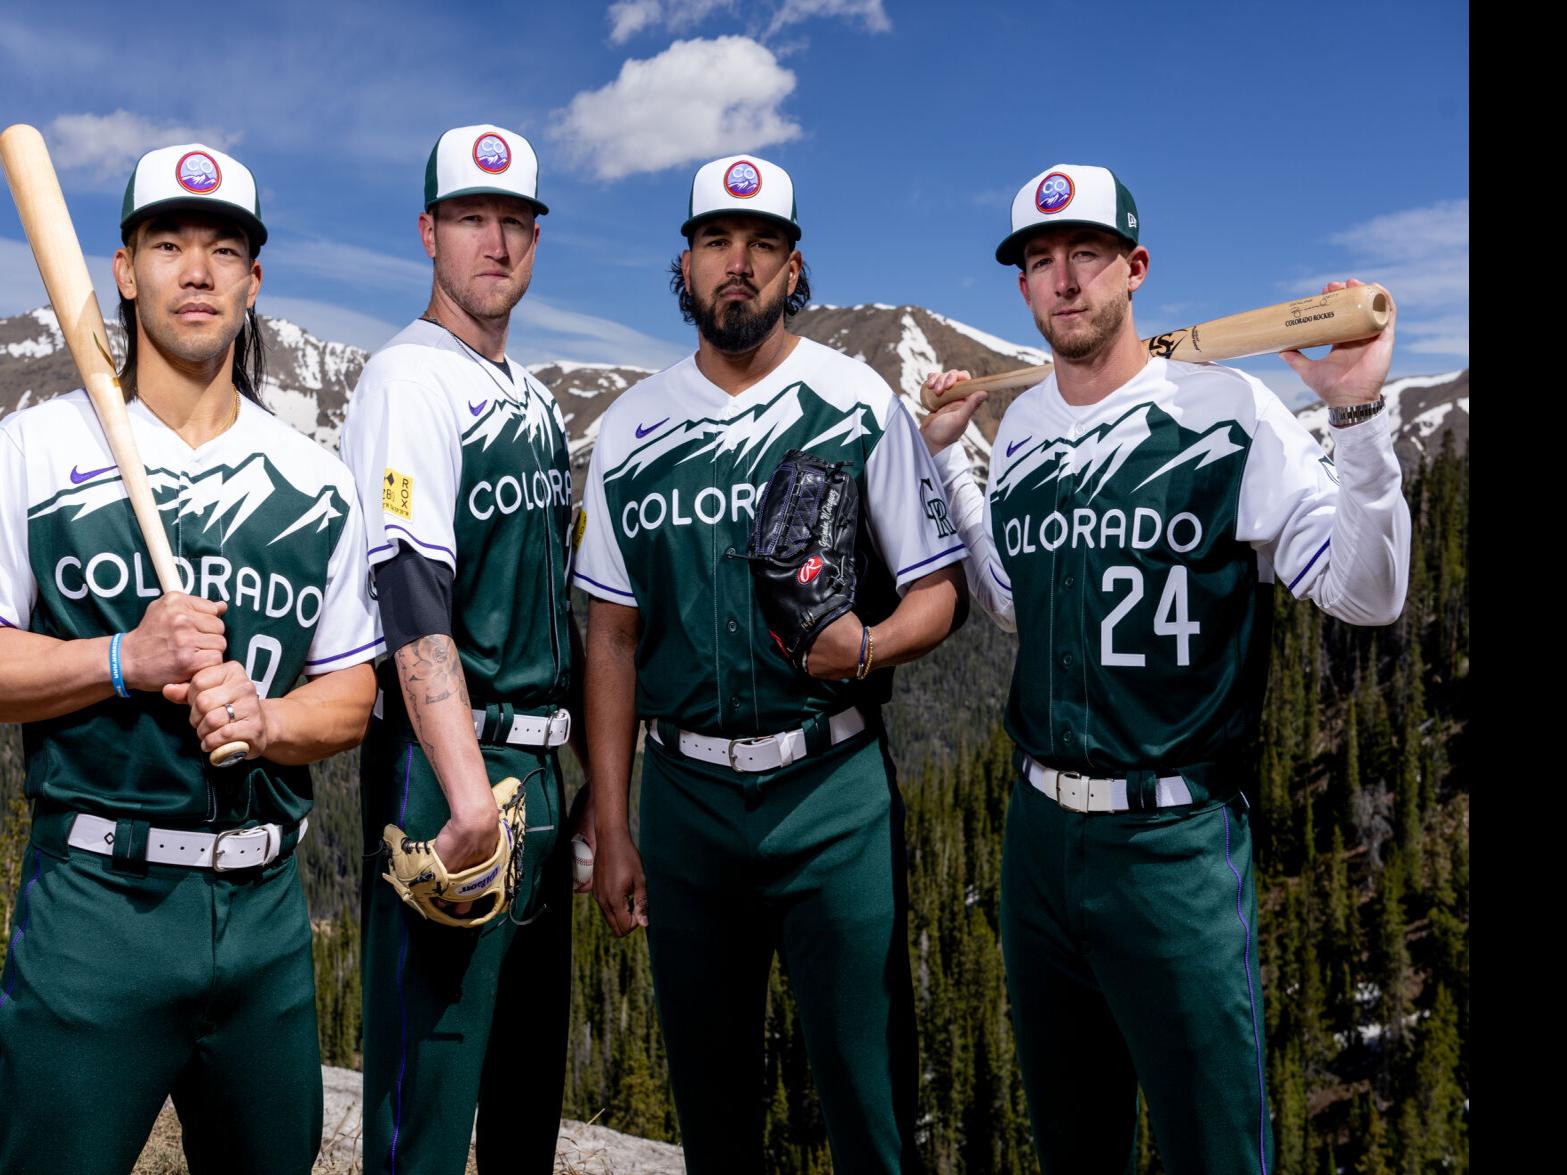 Rockies city connect uniforms pay tribute to state of Colorado, Sports